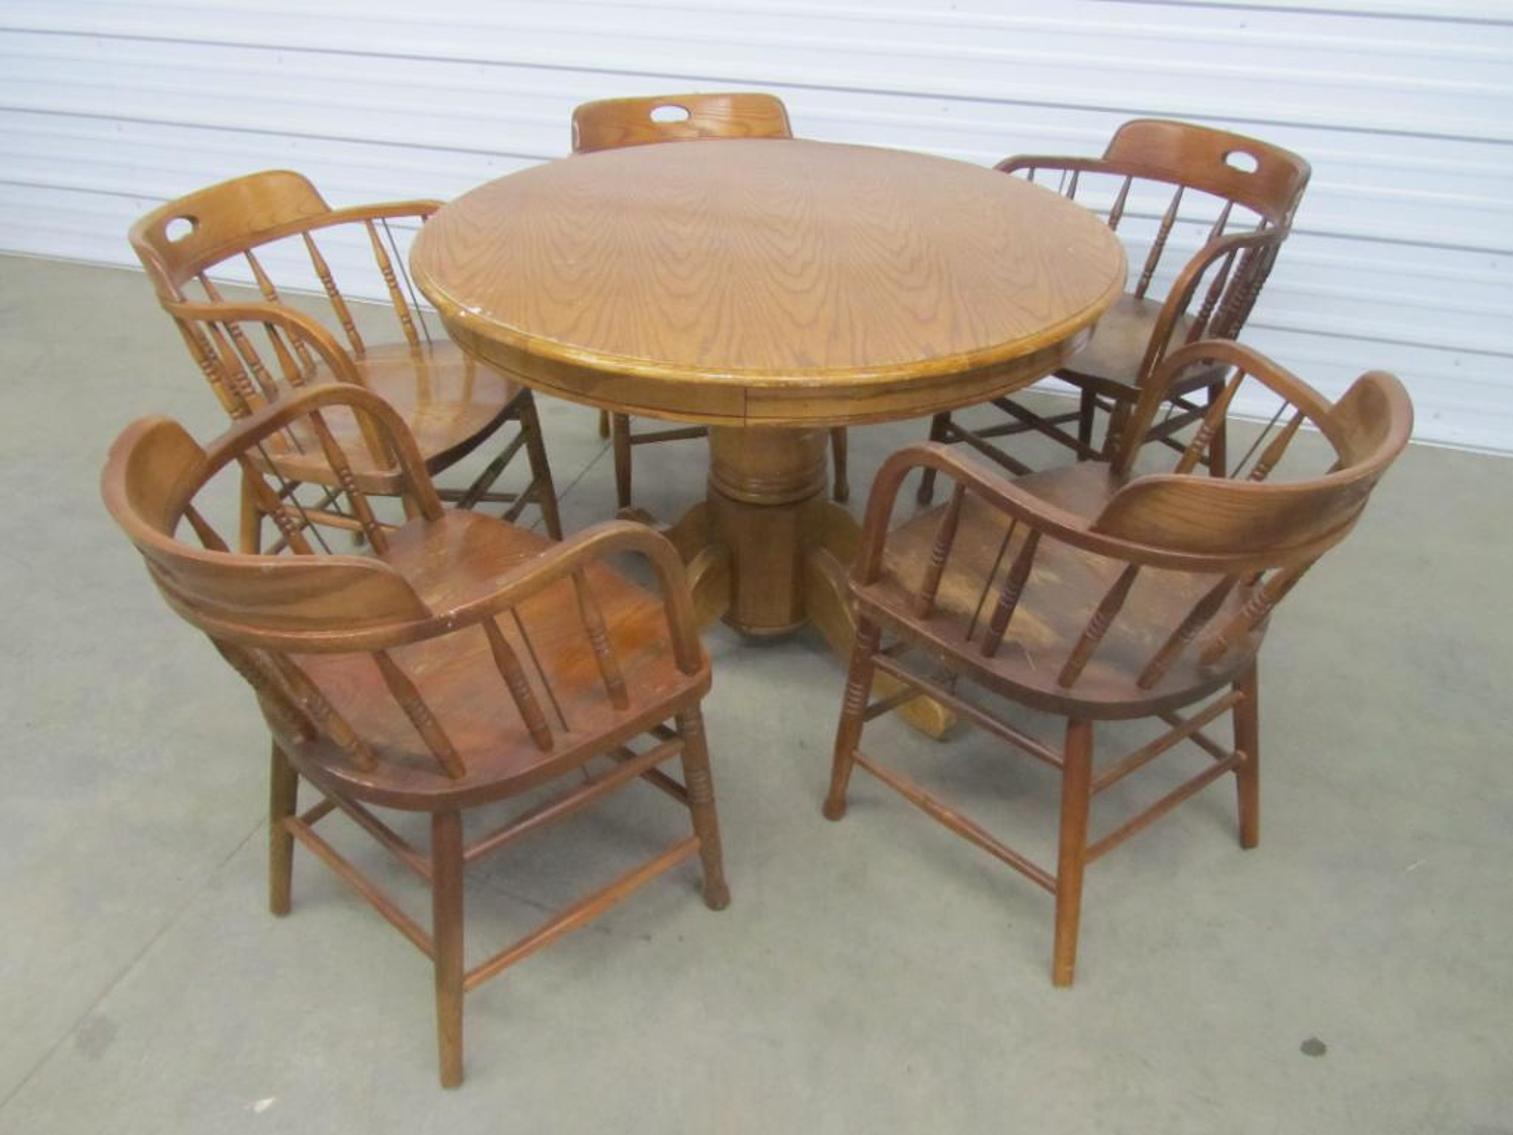 Ideal Corners March Consignment Auction